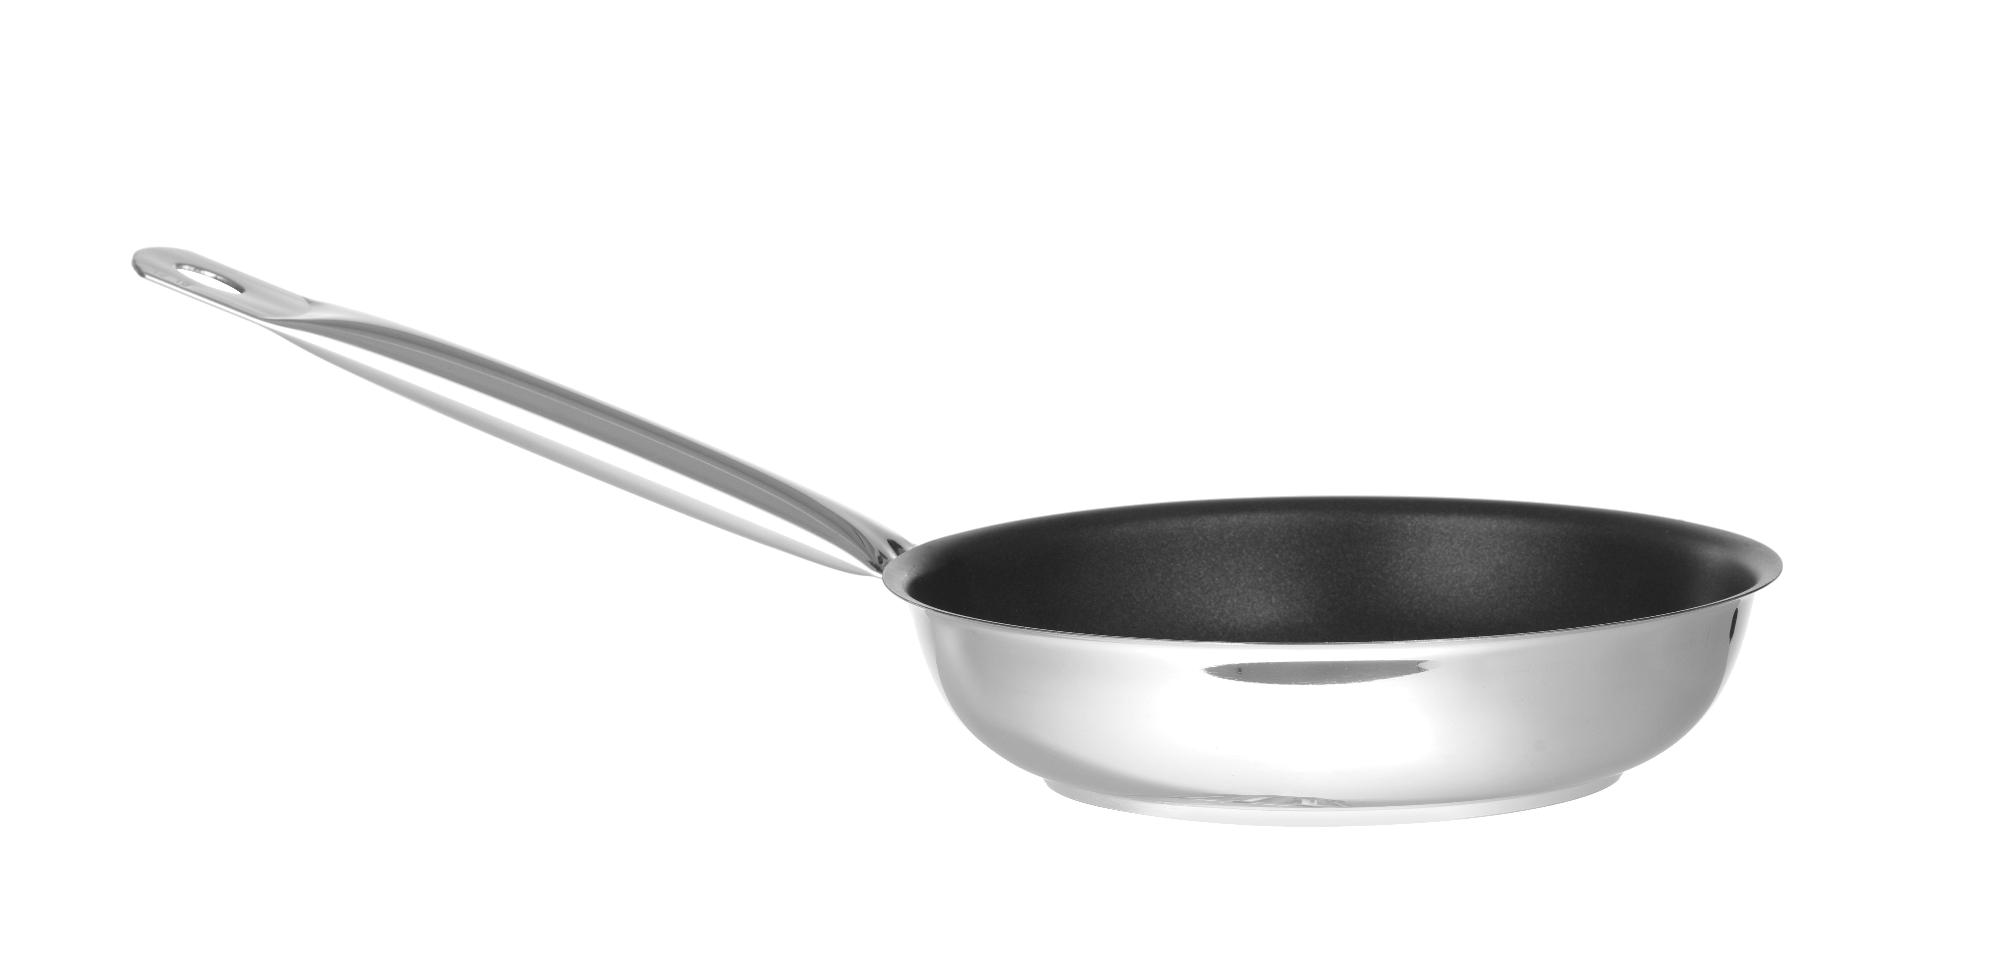 Non-stick coated frying pan, 200mm